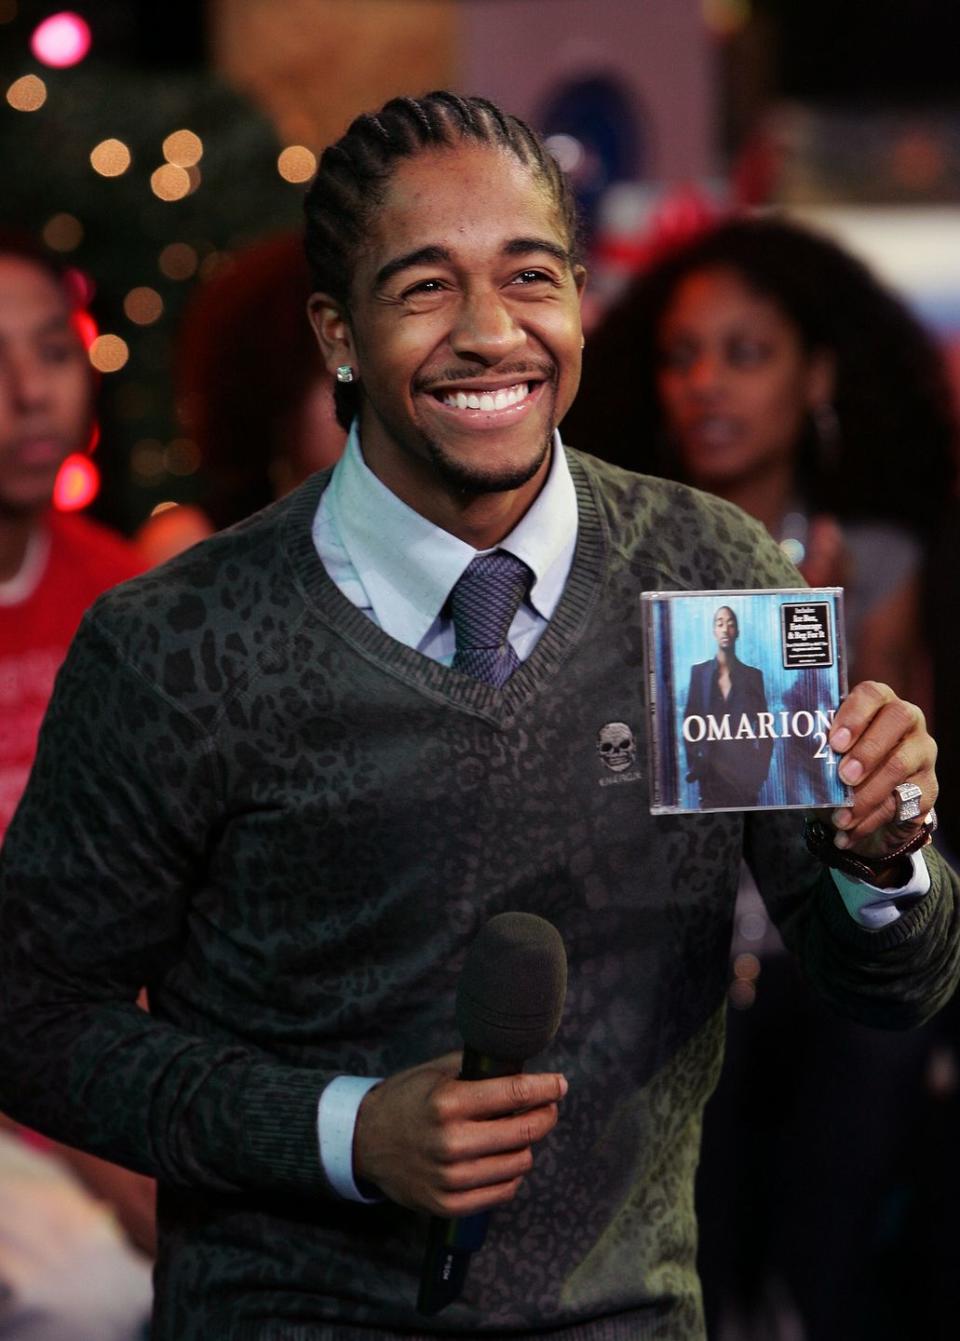 Omarion: Then